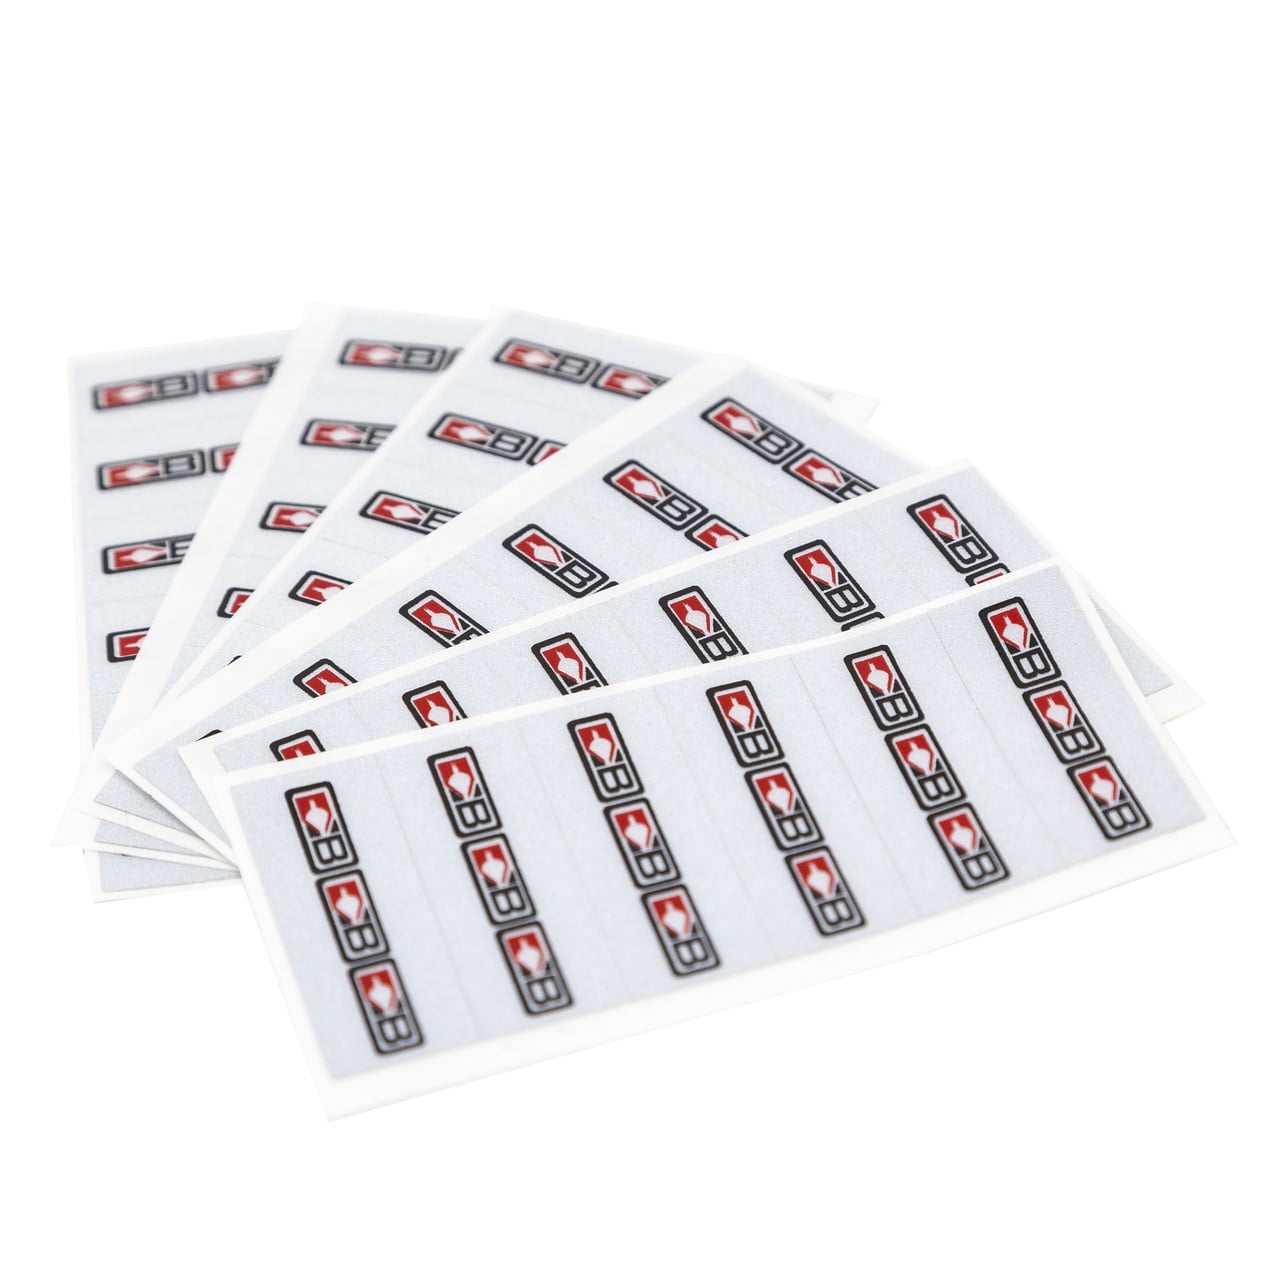 Bohning Visi-Wrap Reflective Decal with Bohning Logo Made in the USA ...